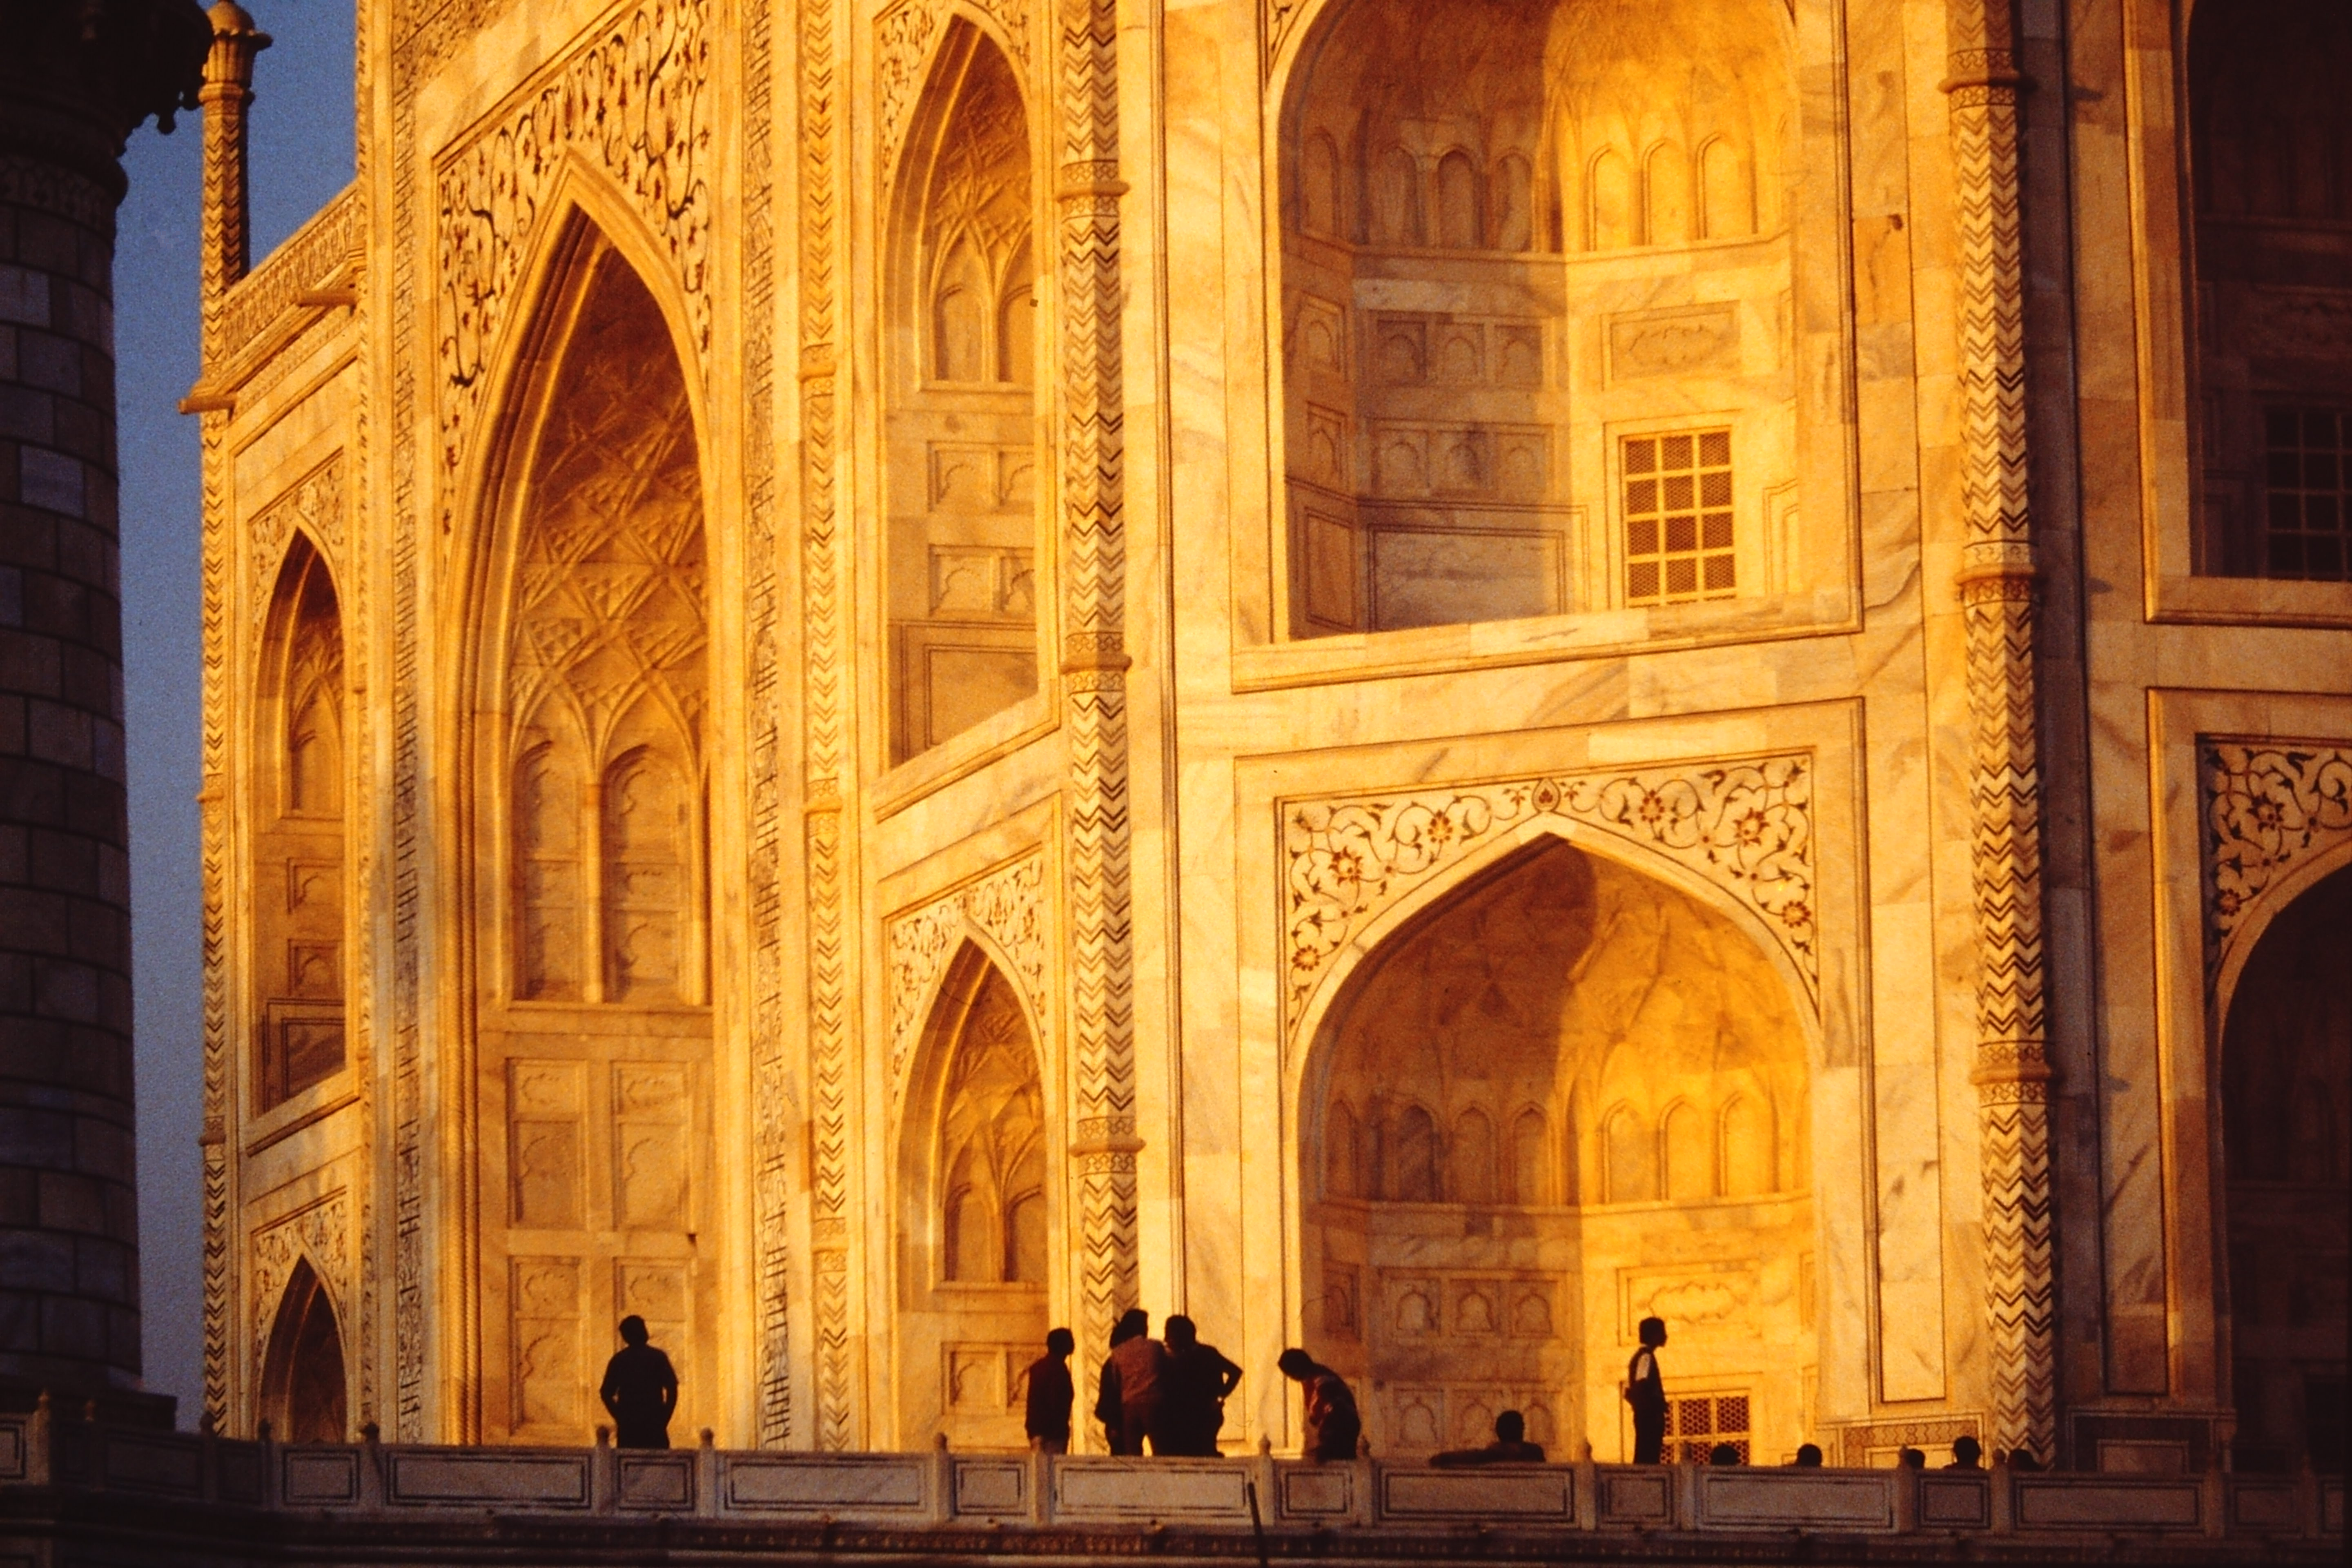 A close up of the marble side of the Taj Mahal with the sun shining on it creating a gold glow, with people walking around in front.